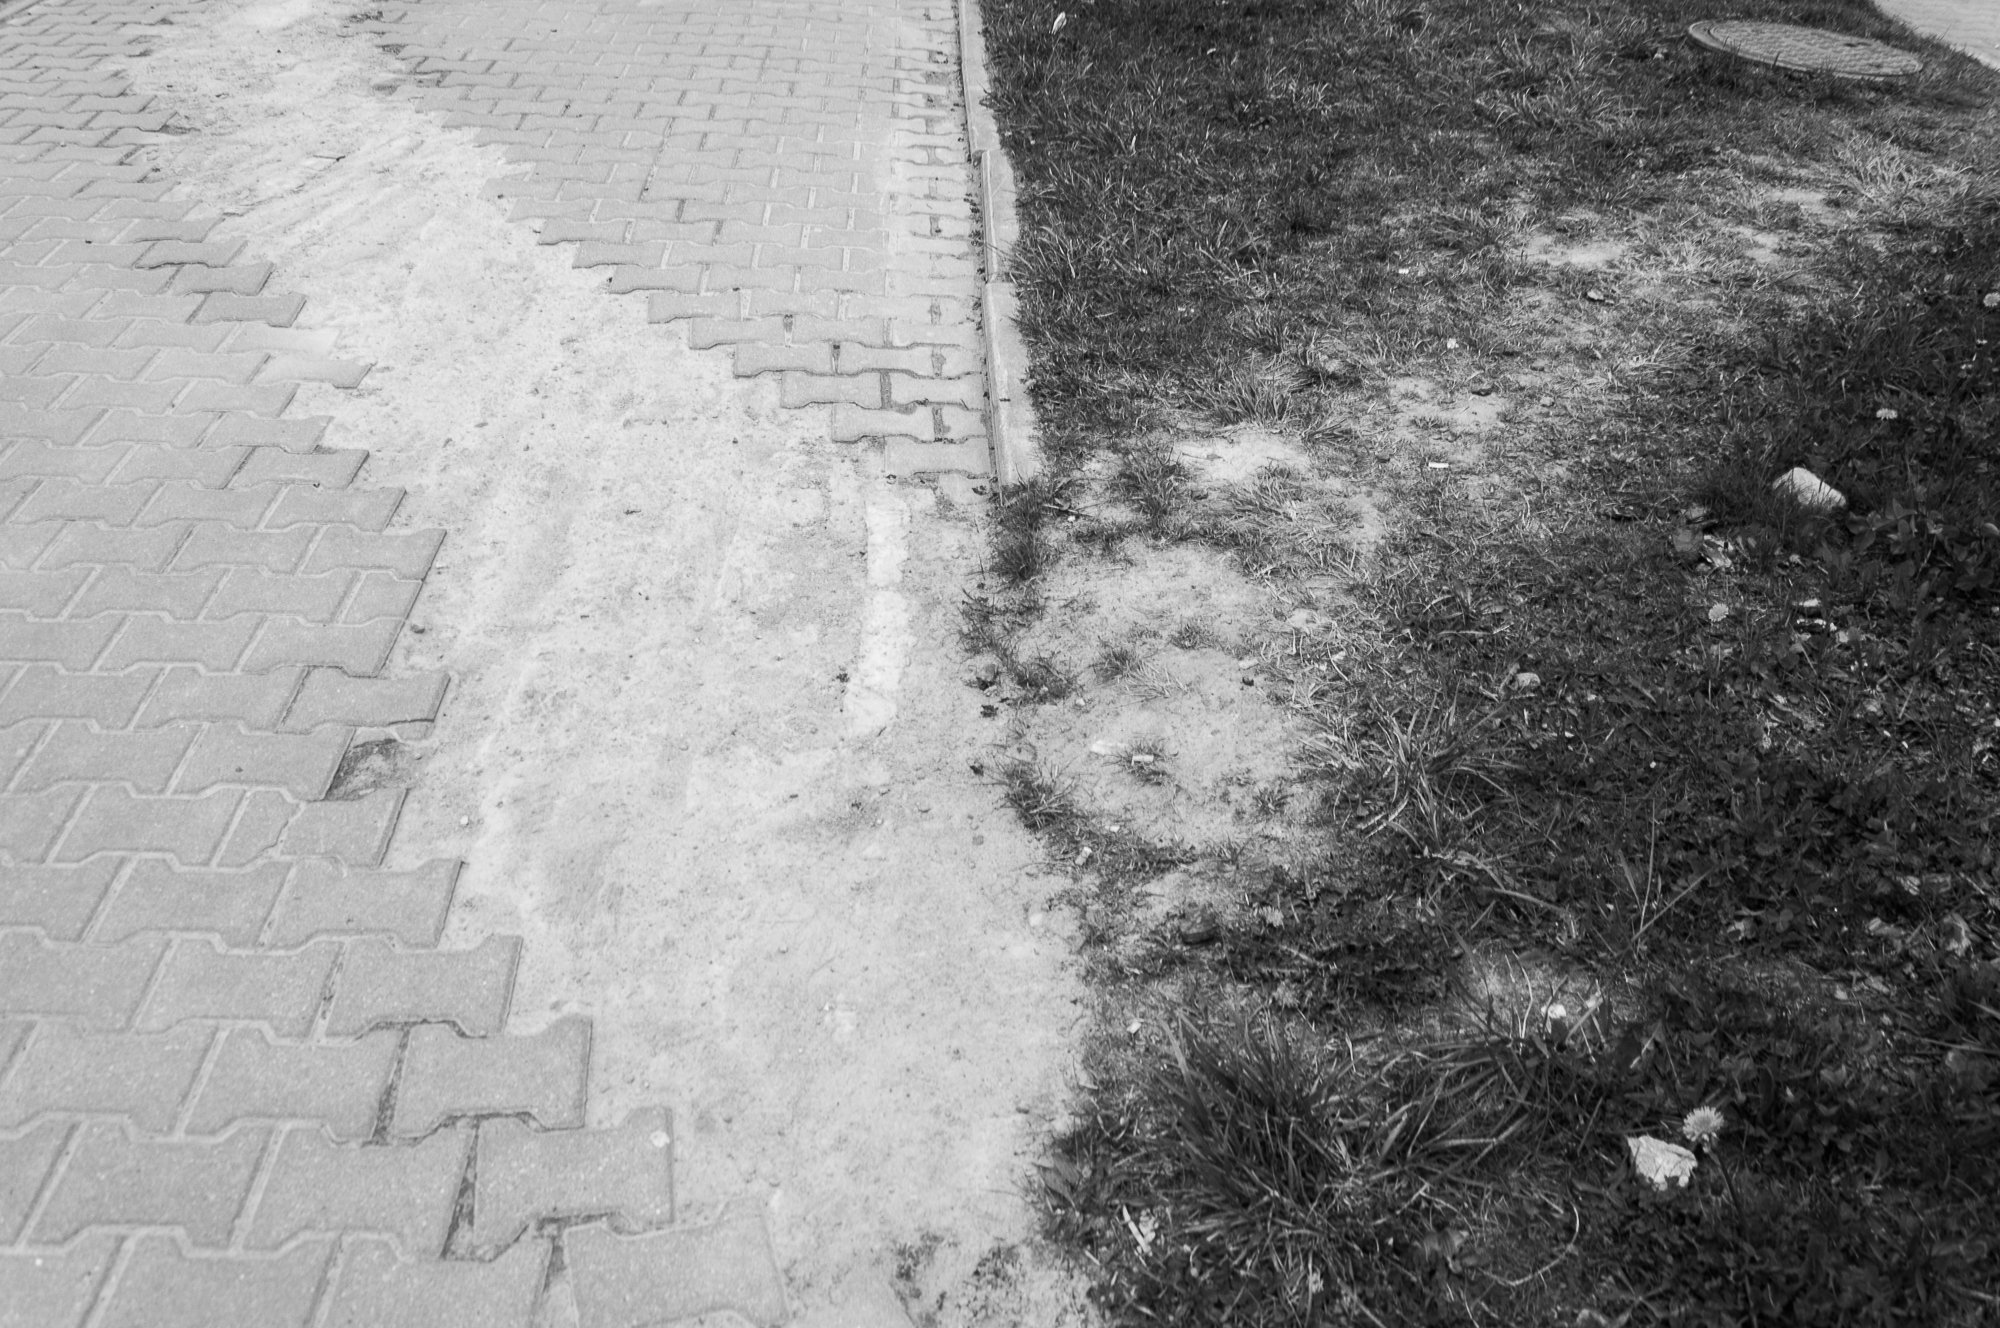 Adam Mazek Photography Warsaw 2021. Post: "Each subsequent day." Minimalism. You can go your own way.